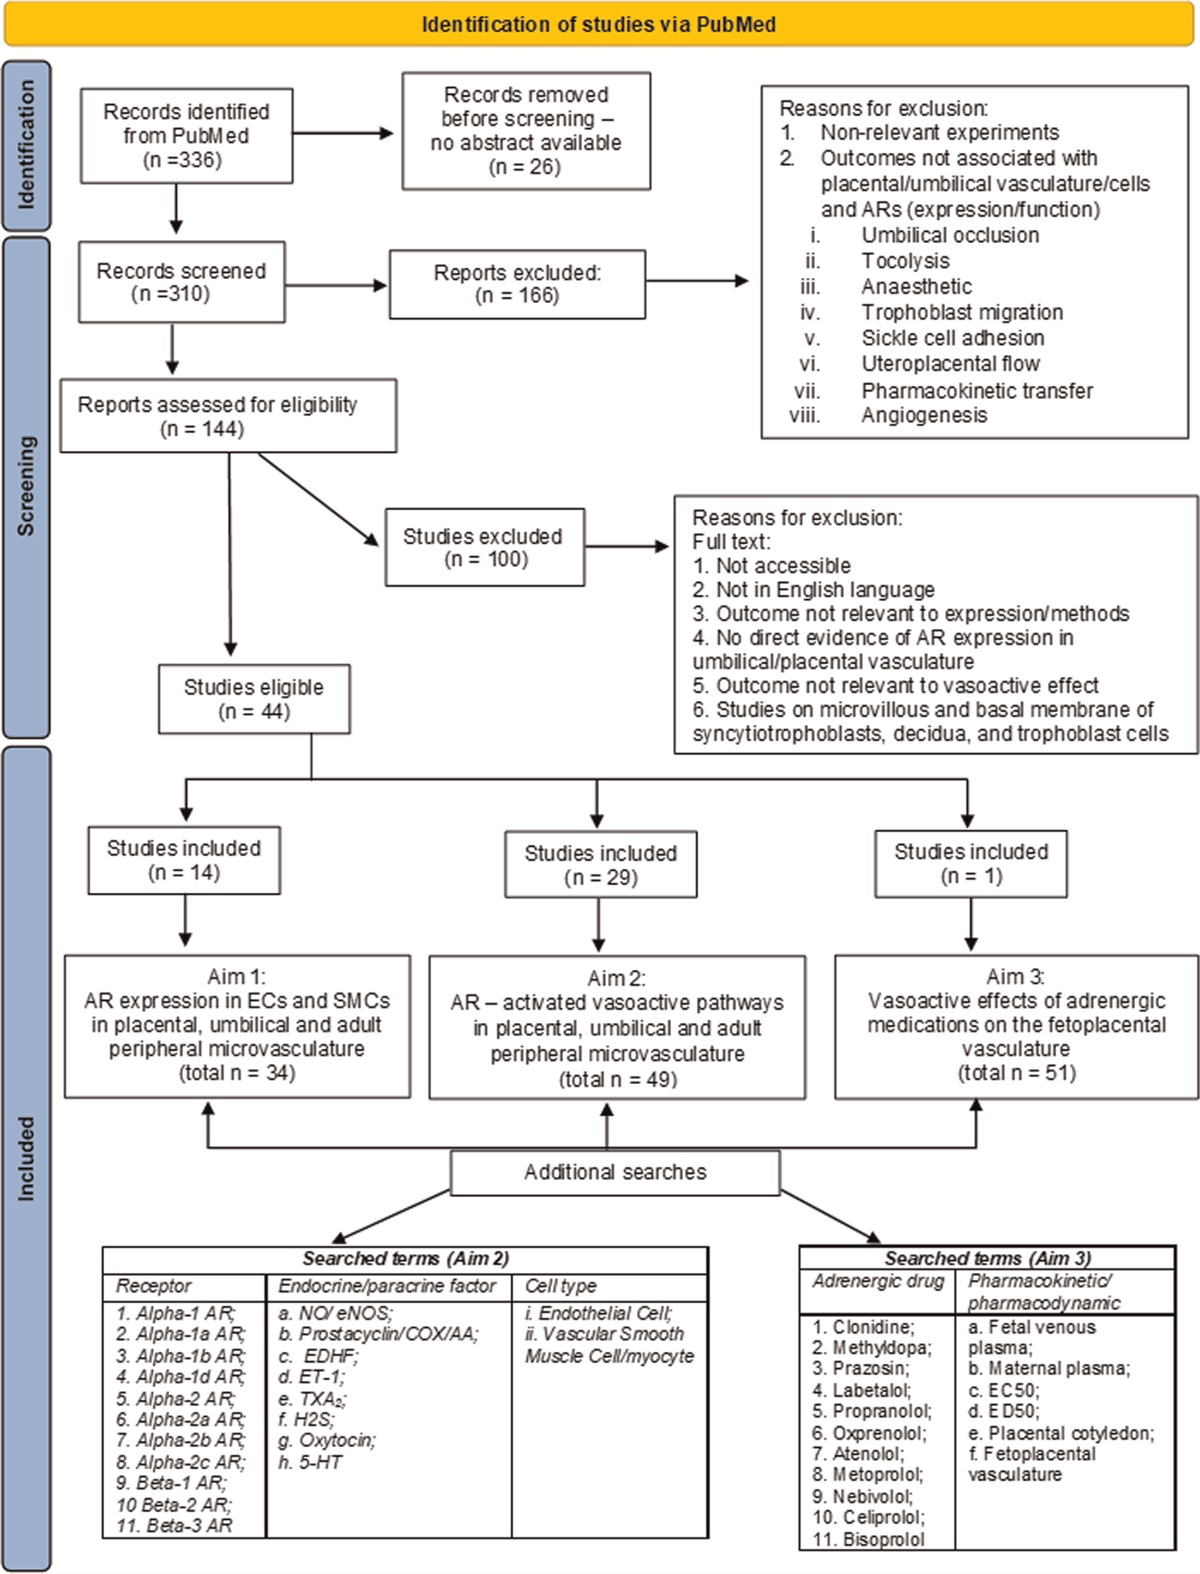 Fetoplacental vascular effects of maternal adrenergic antihypertensive and cardioprotective medications in pregnancy